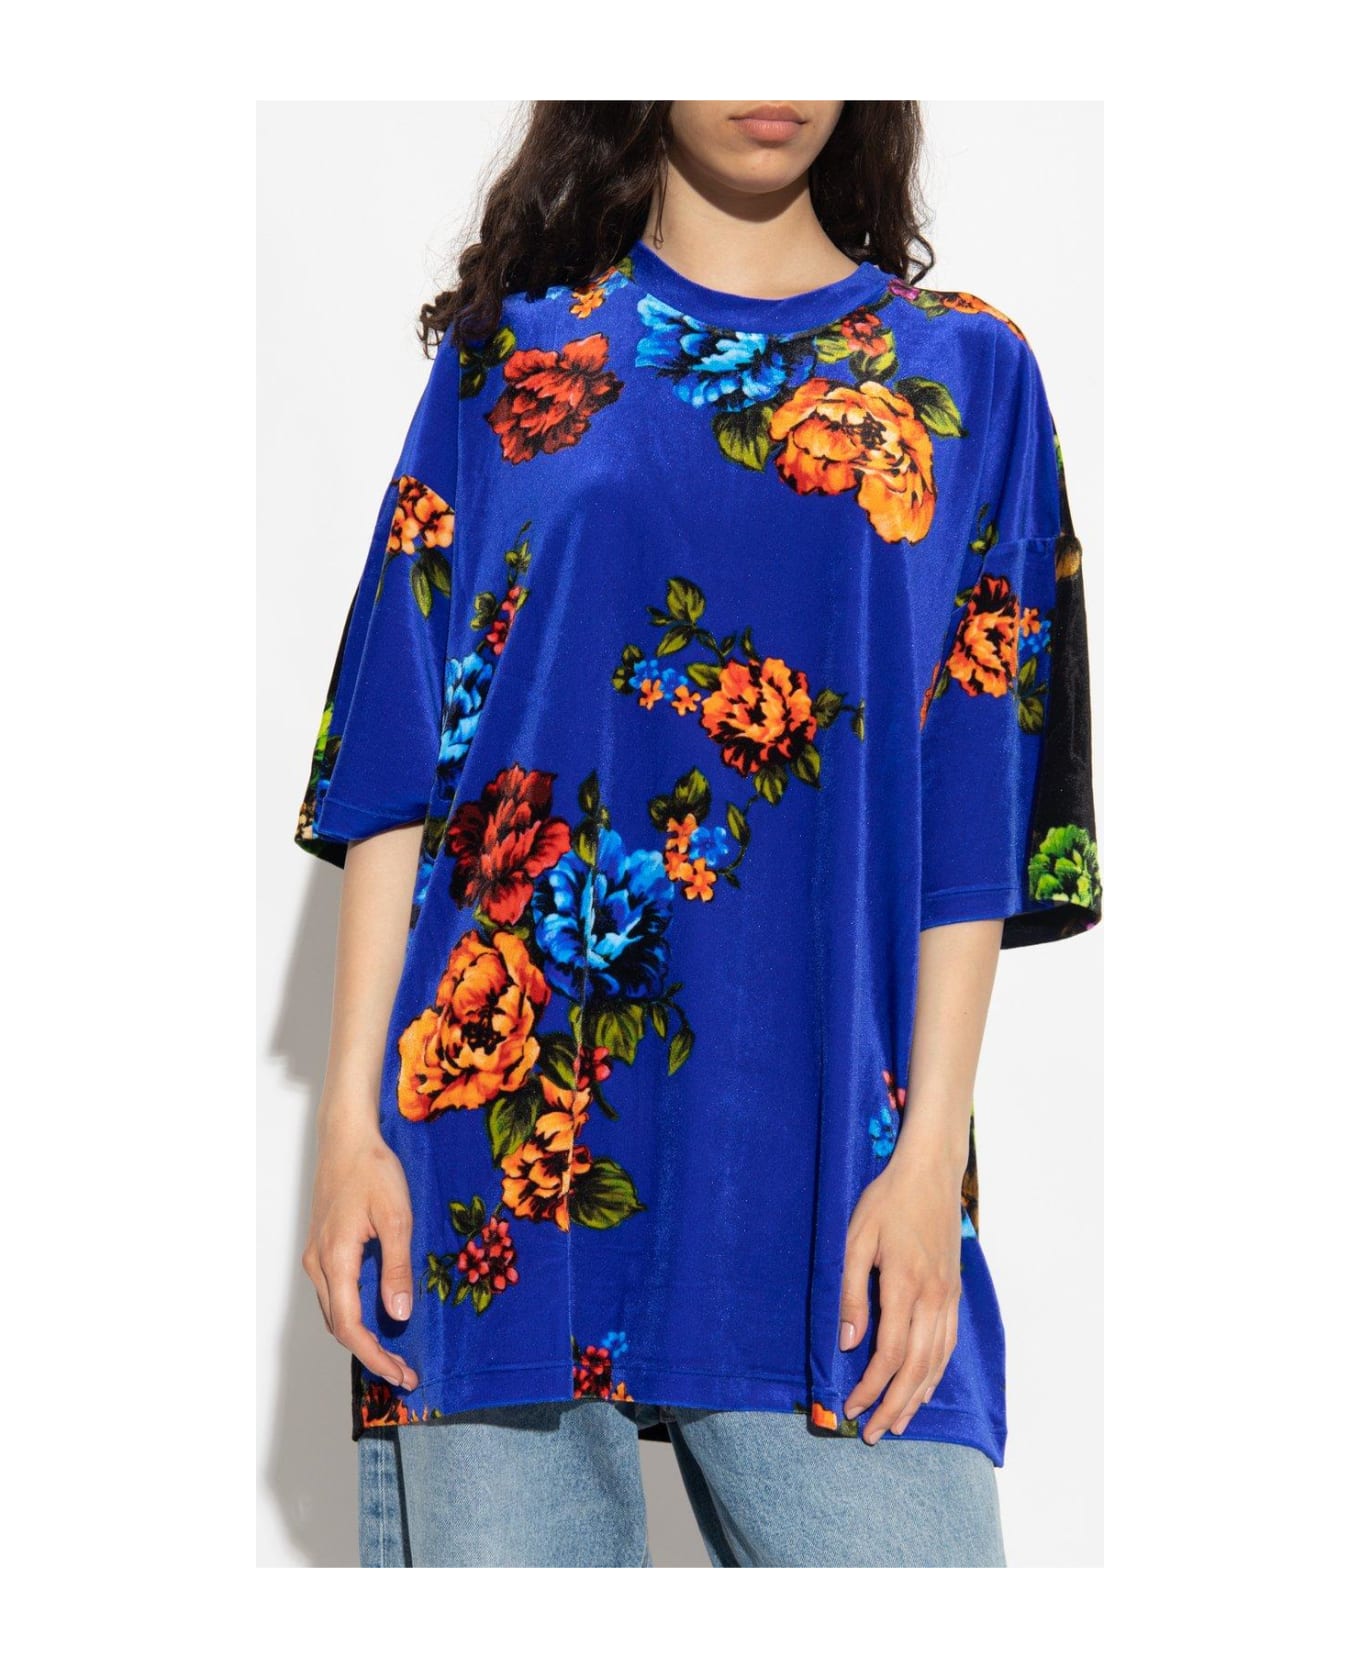 VETEMENTS Floral Printed Round-neck T-shirt - BLUE